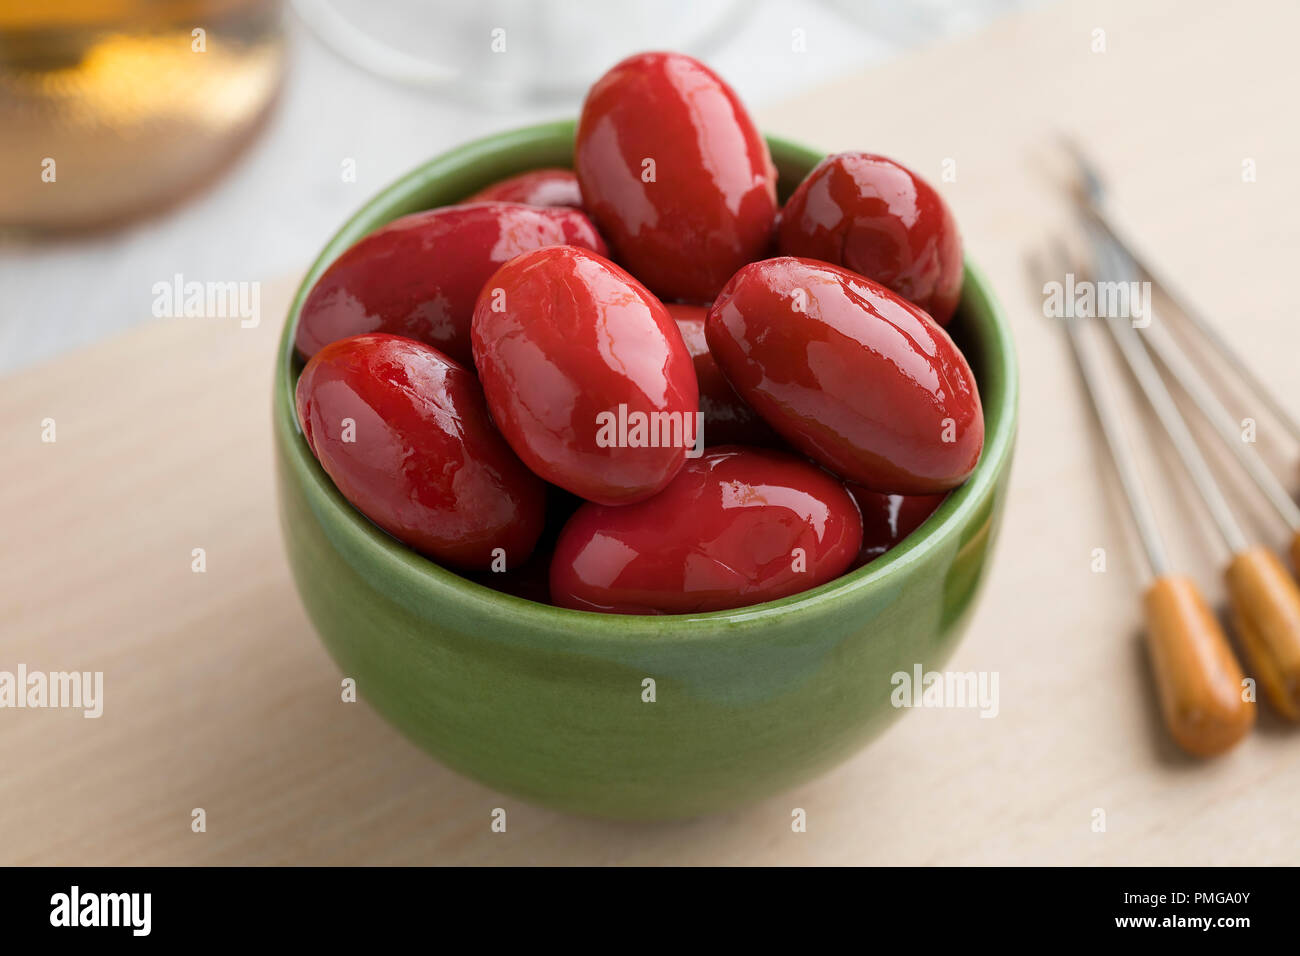 Bowl with red Italian Bella di cerignola olives as snack food Stock Photo